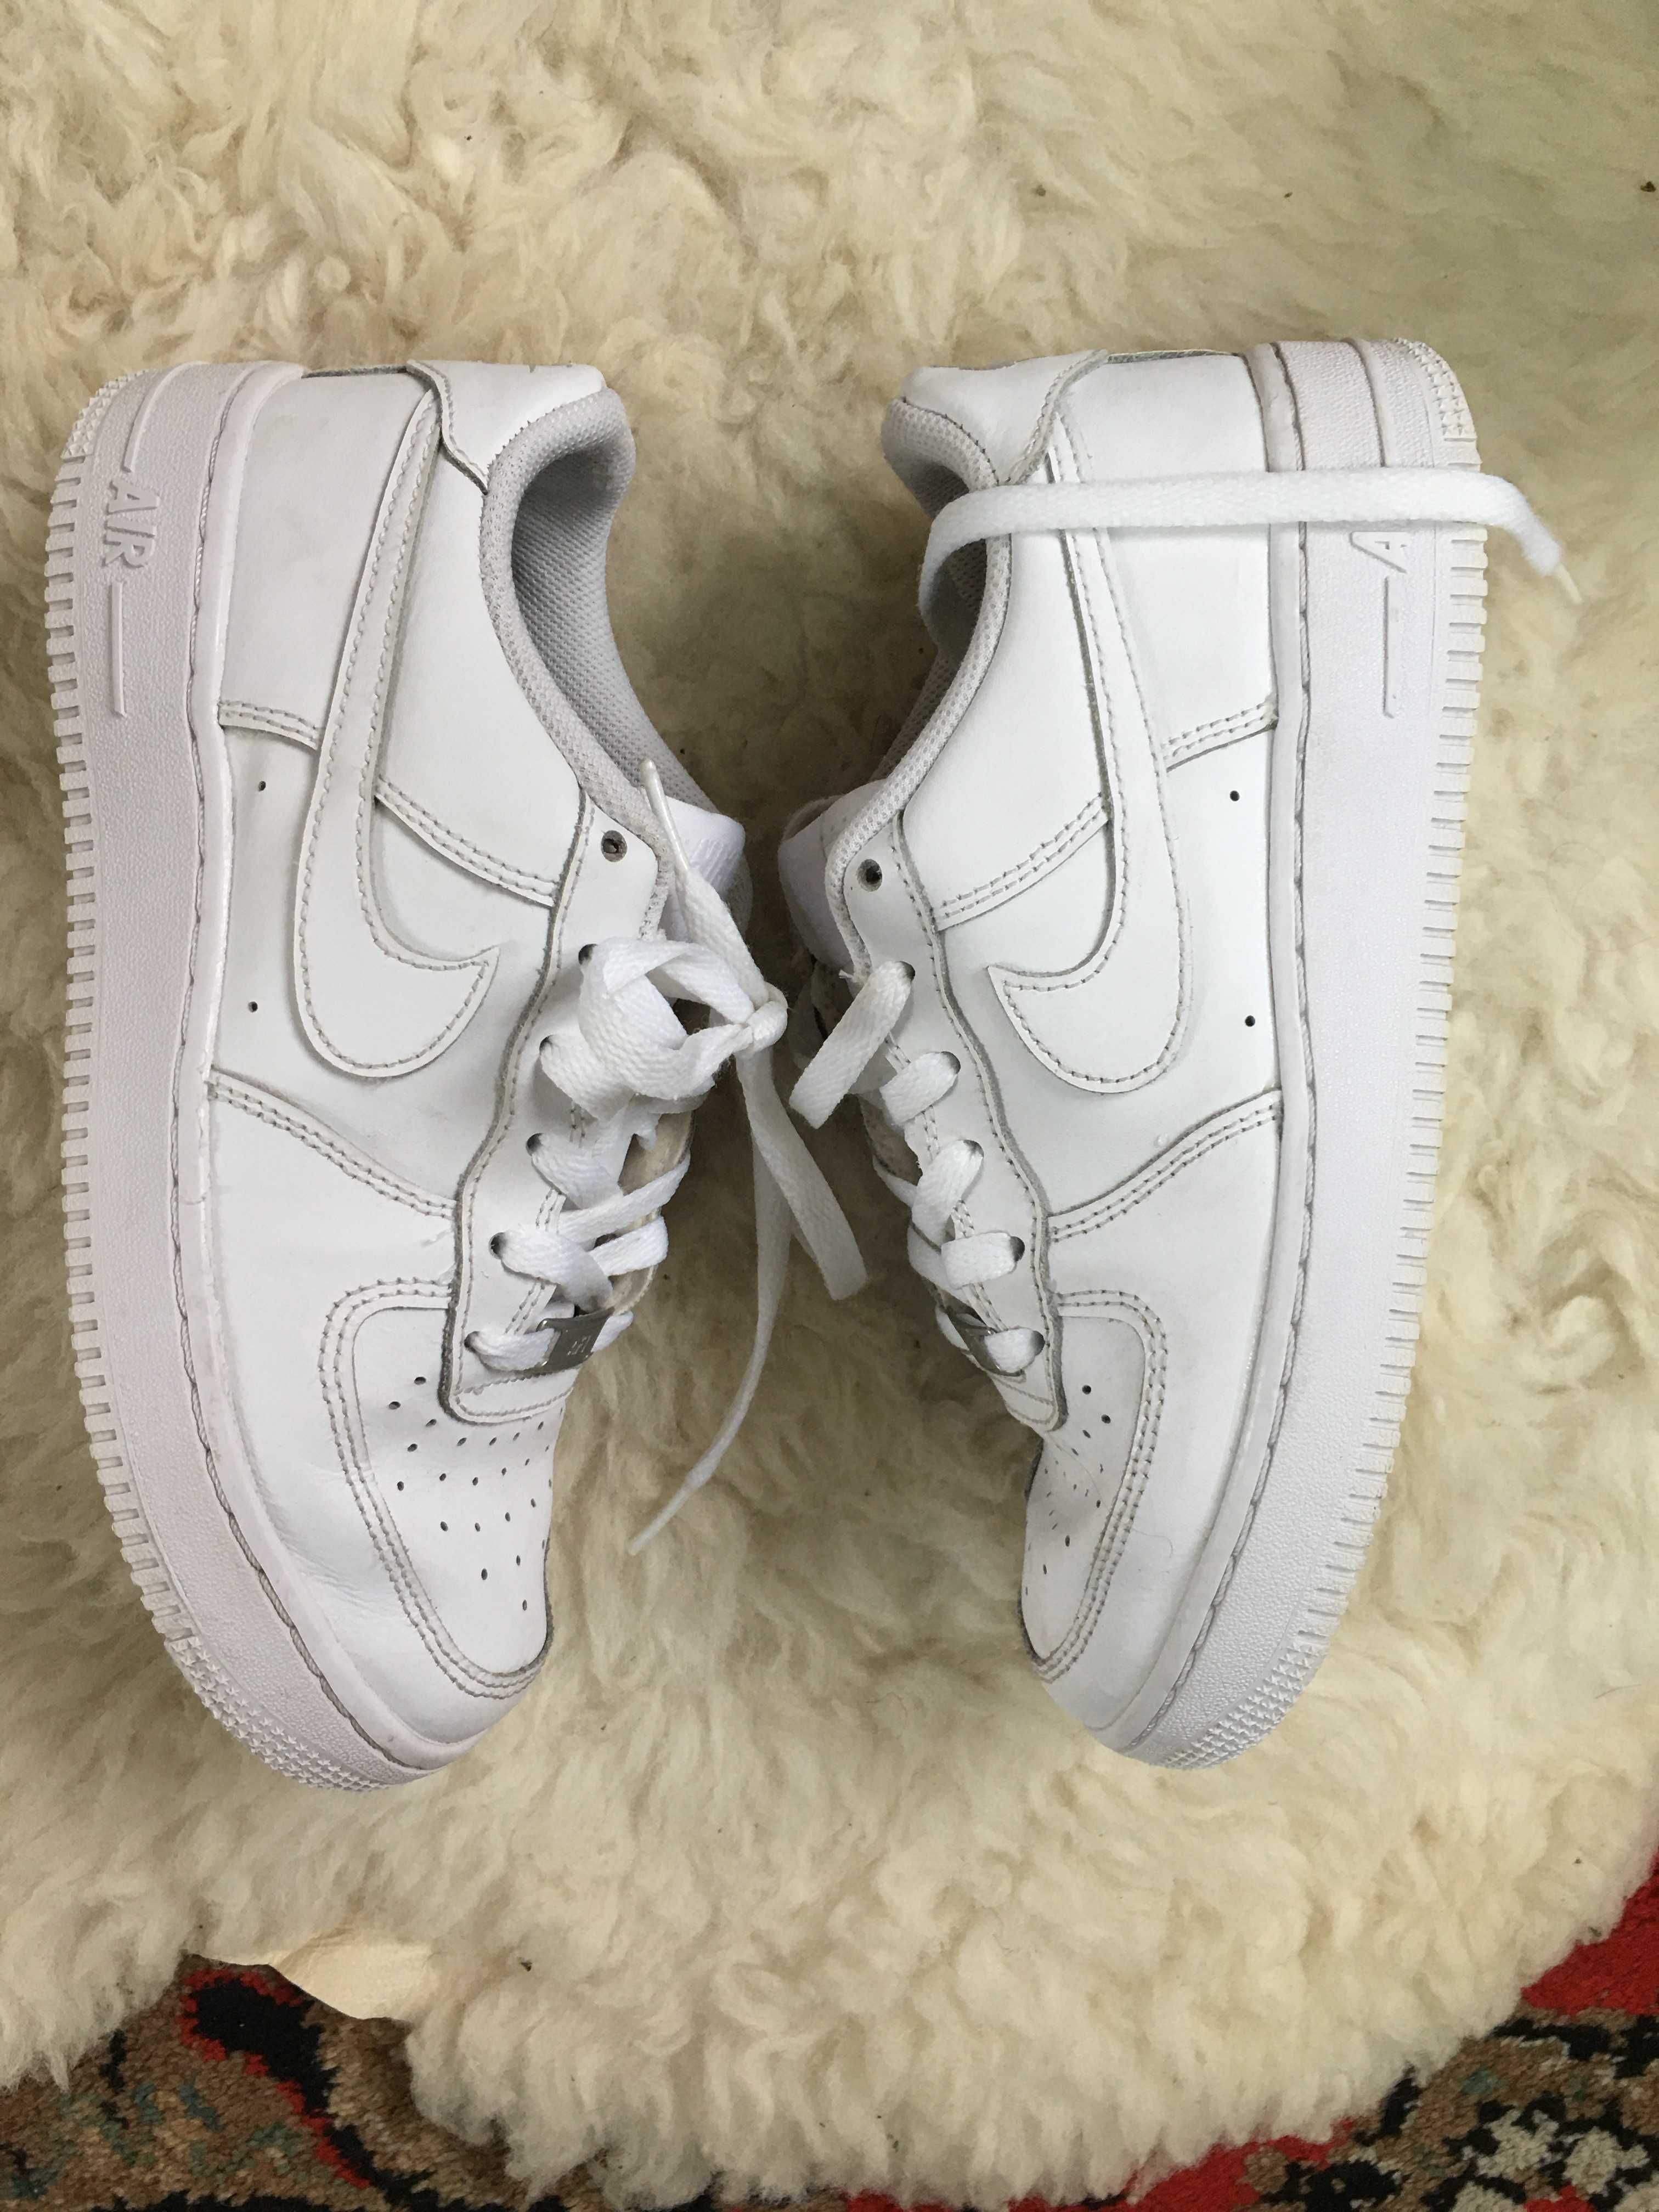 Кроссовки Nike air force 1 low (gs) white (314192-117) р.38-ст. 24.см